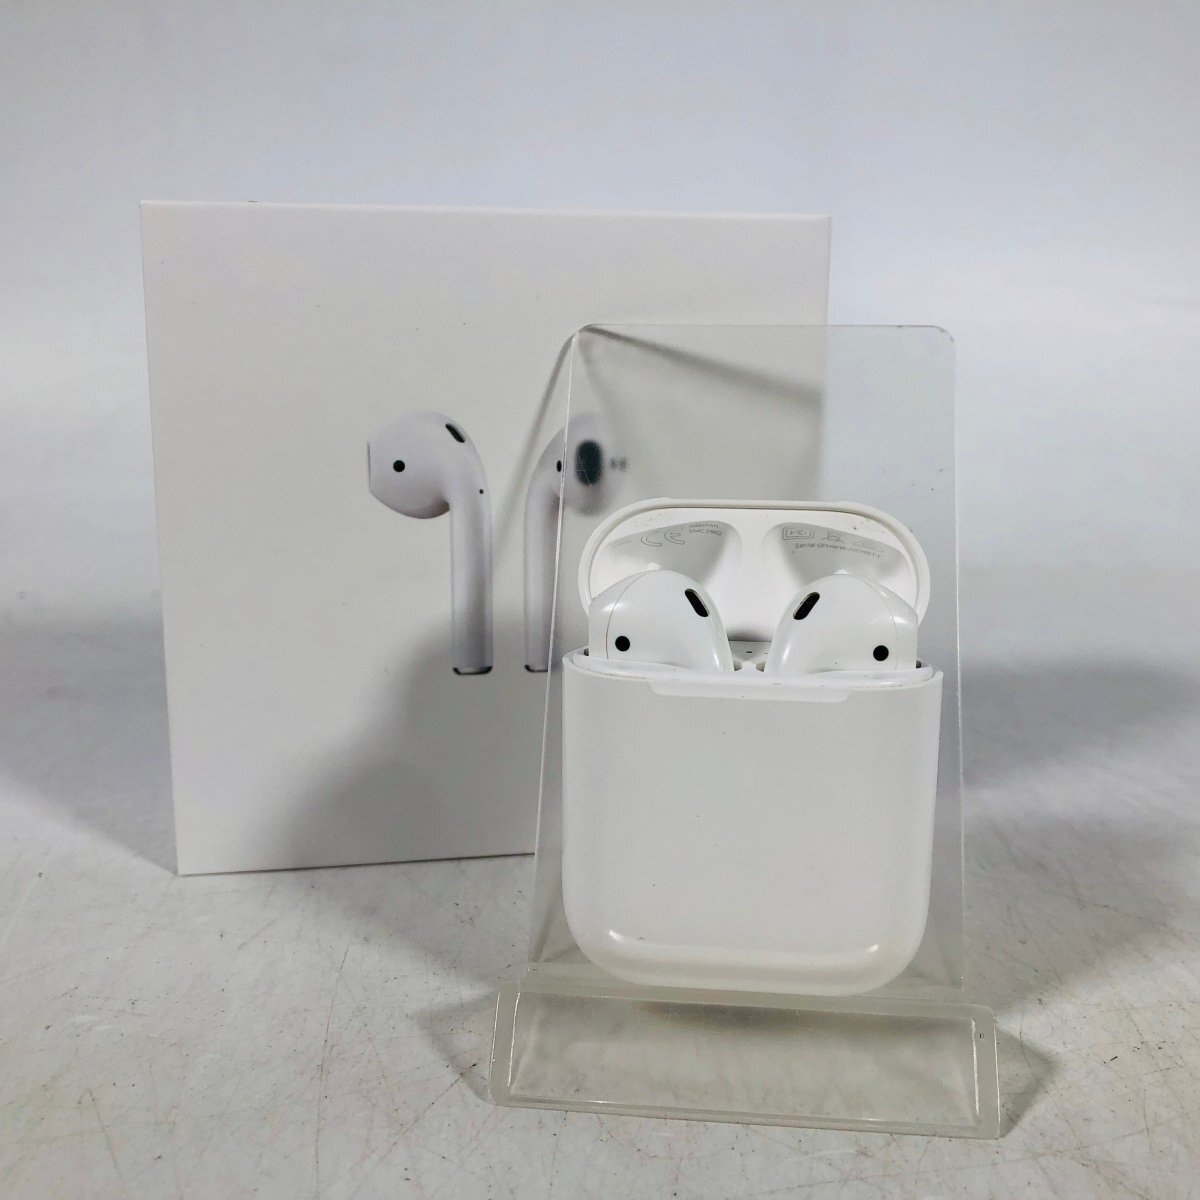 Apple AirPods with Charging Case MMEF2J/Aの画像1